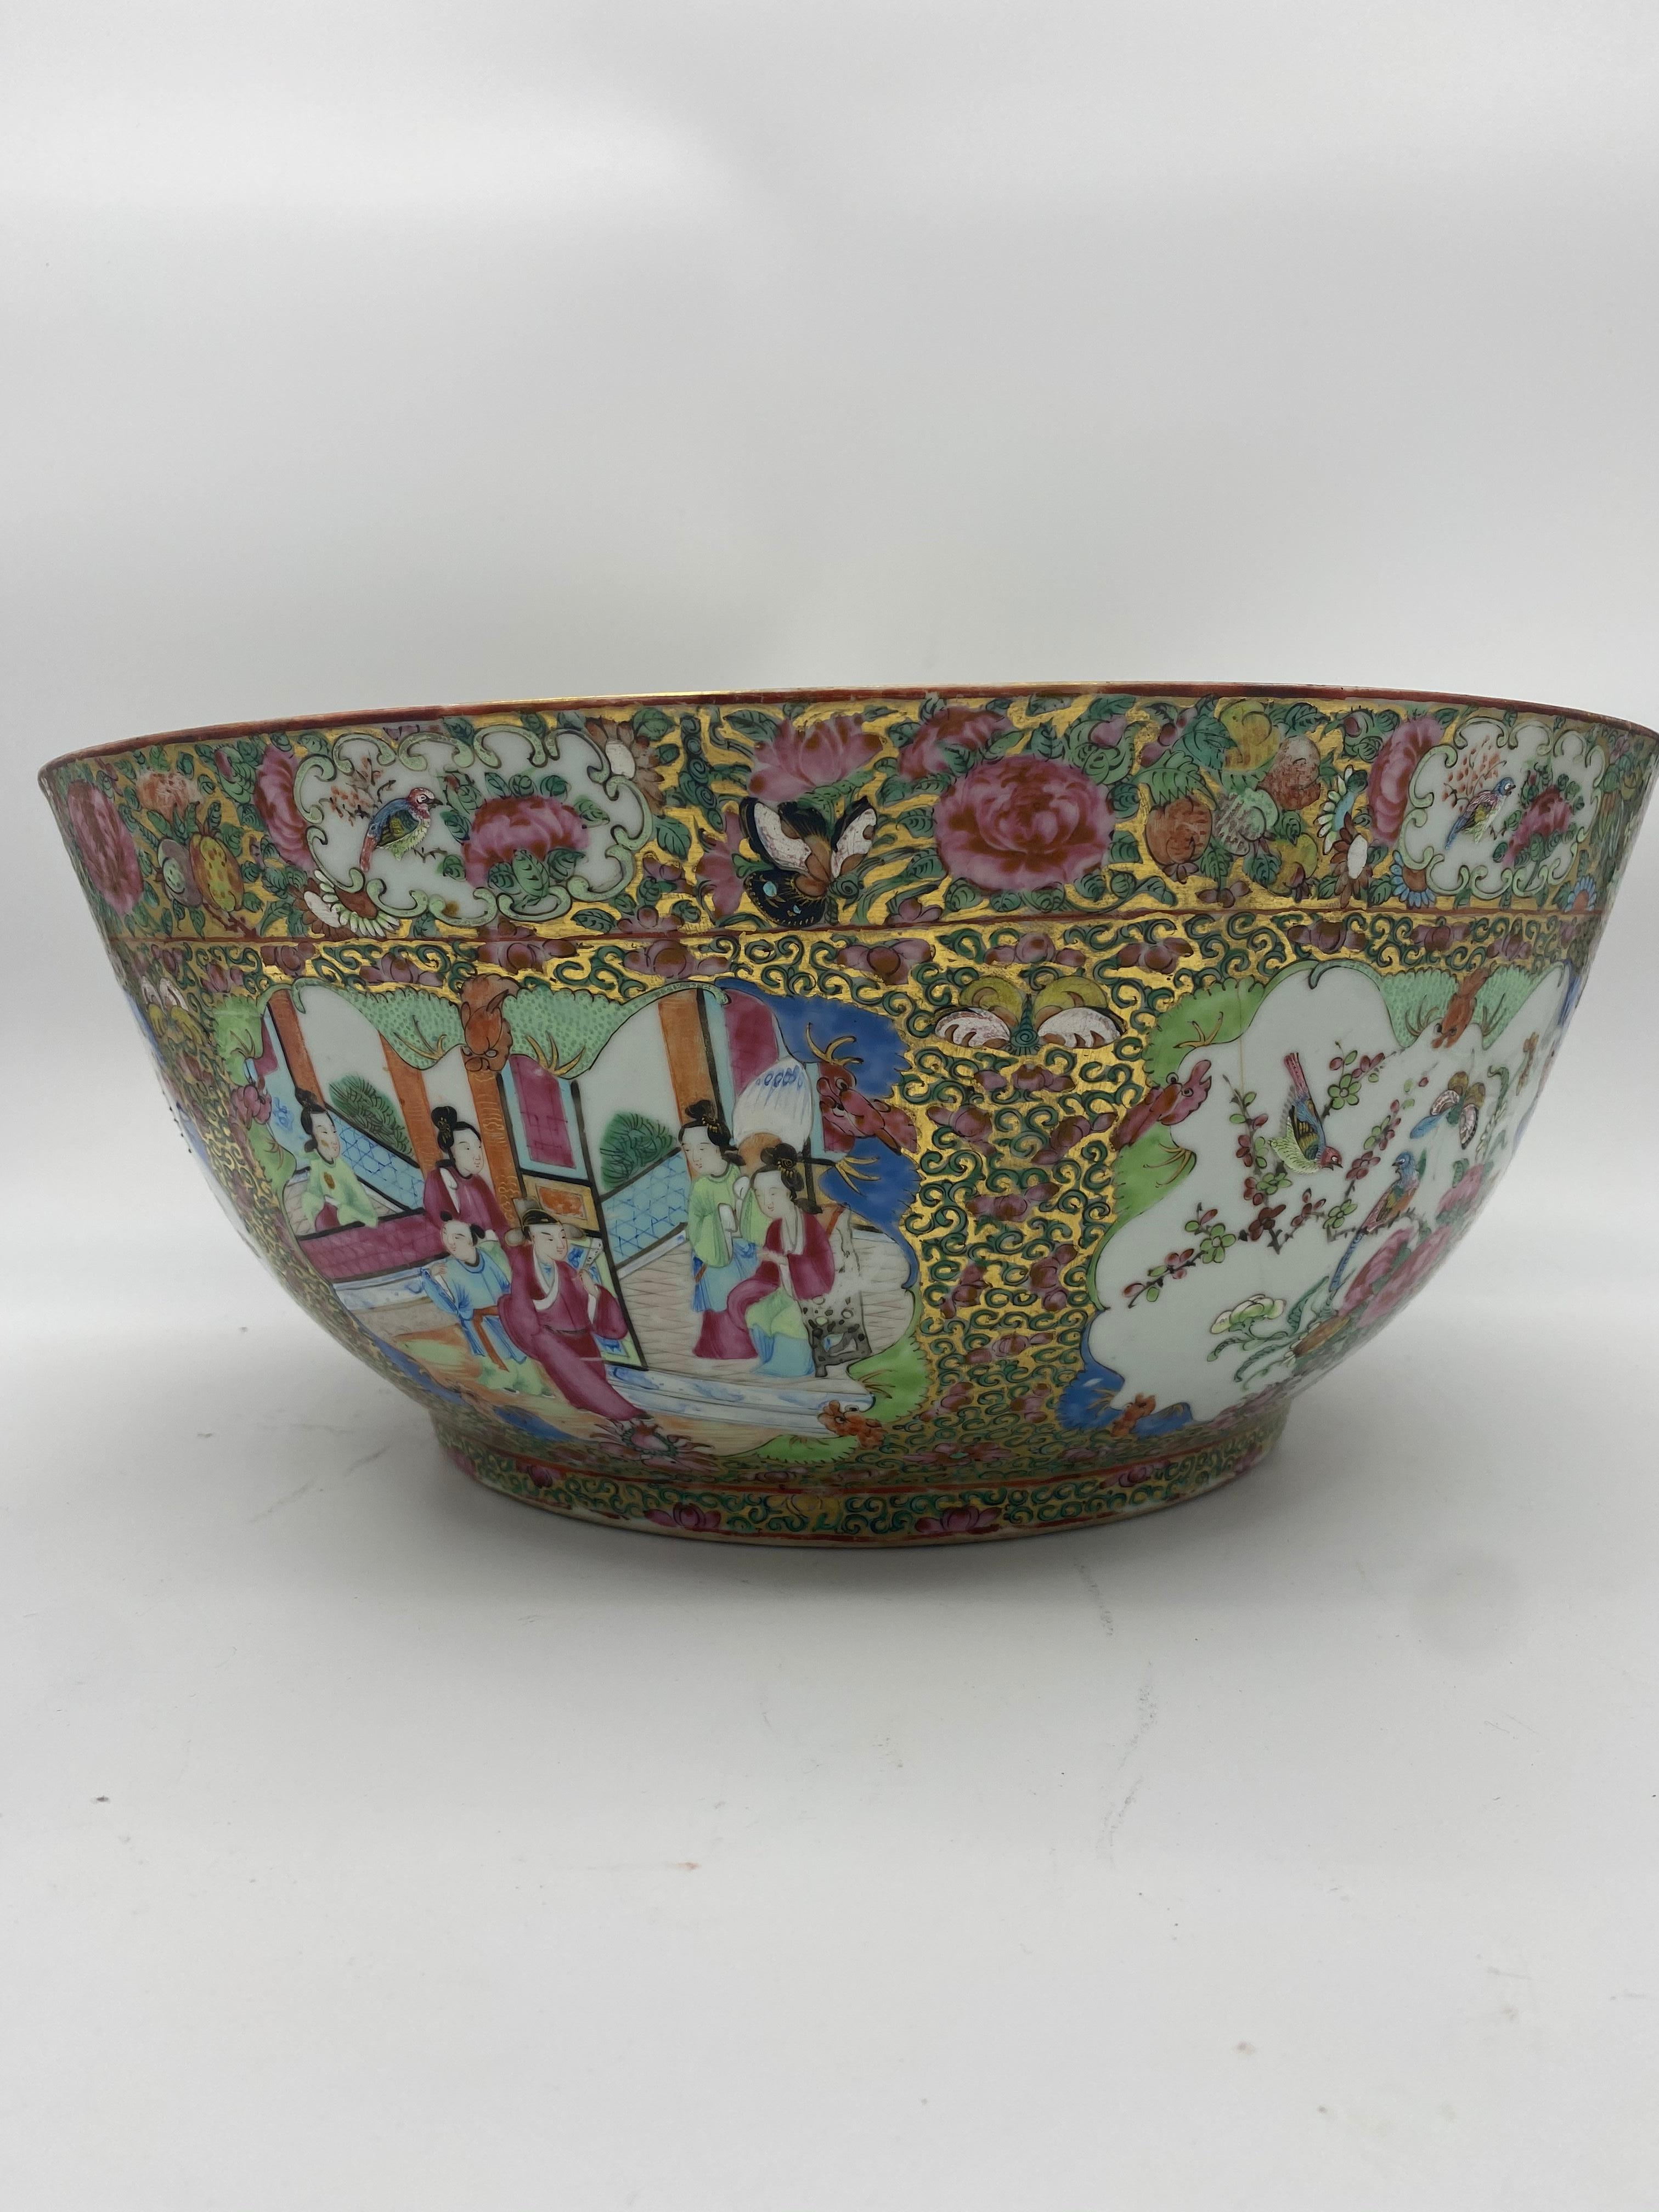 19th century Chinese famille rose porcelain large bowl from the Qing Dynasty. Very unique and hard to find, with a 40 cm diameter. Decorated all over beautifully with ancient Chinese people and magnificent flowers and birds.